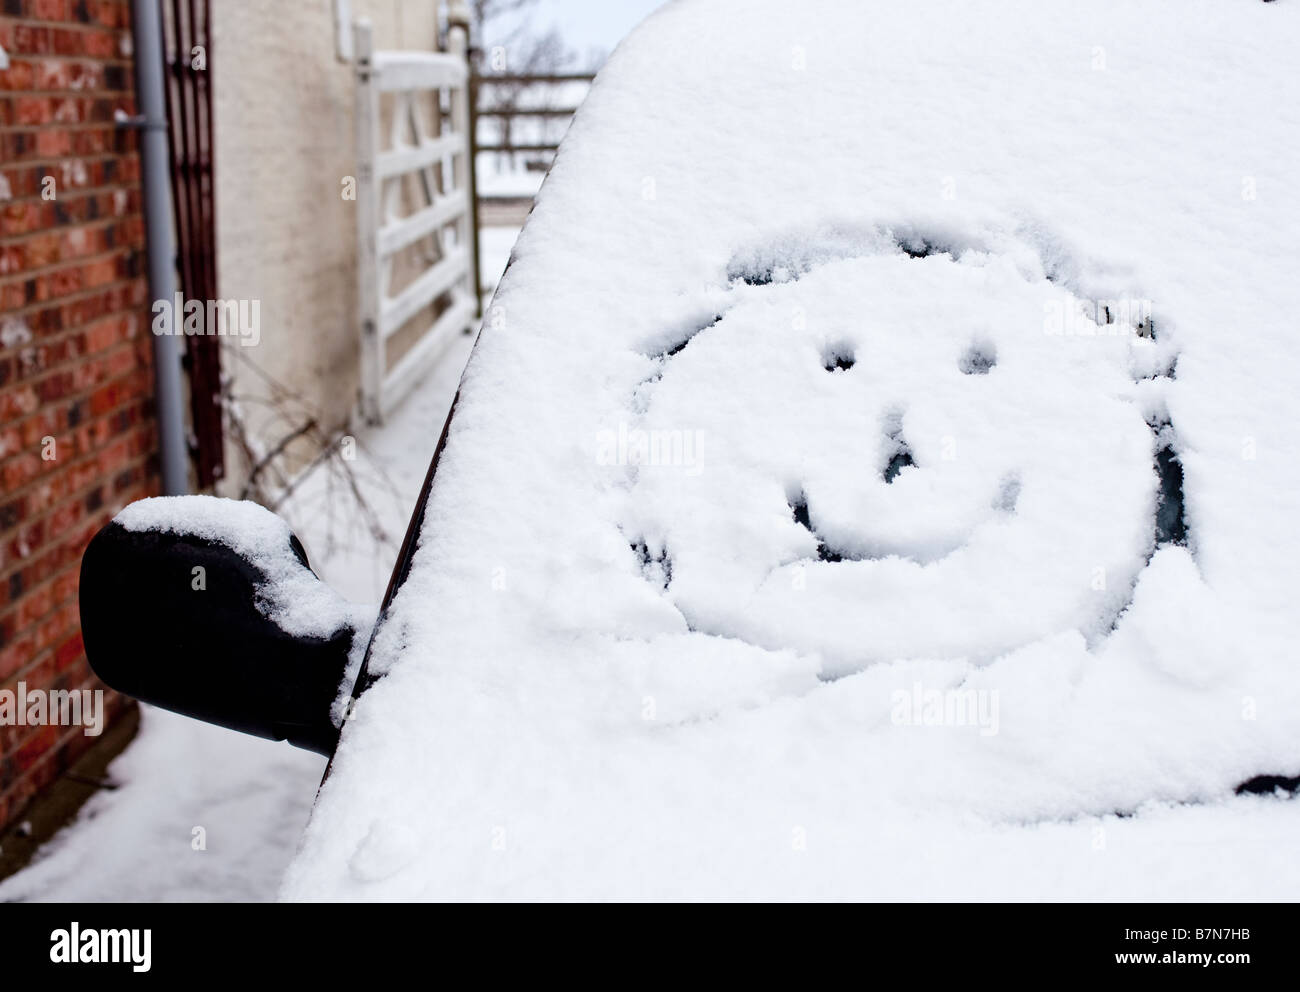 Smiley face drawn in fresh snow on a car windscreen Stock Photo